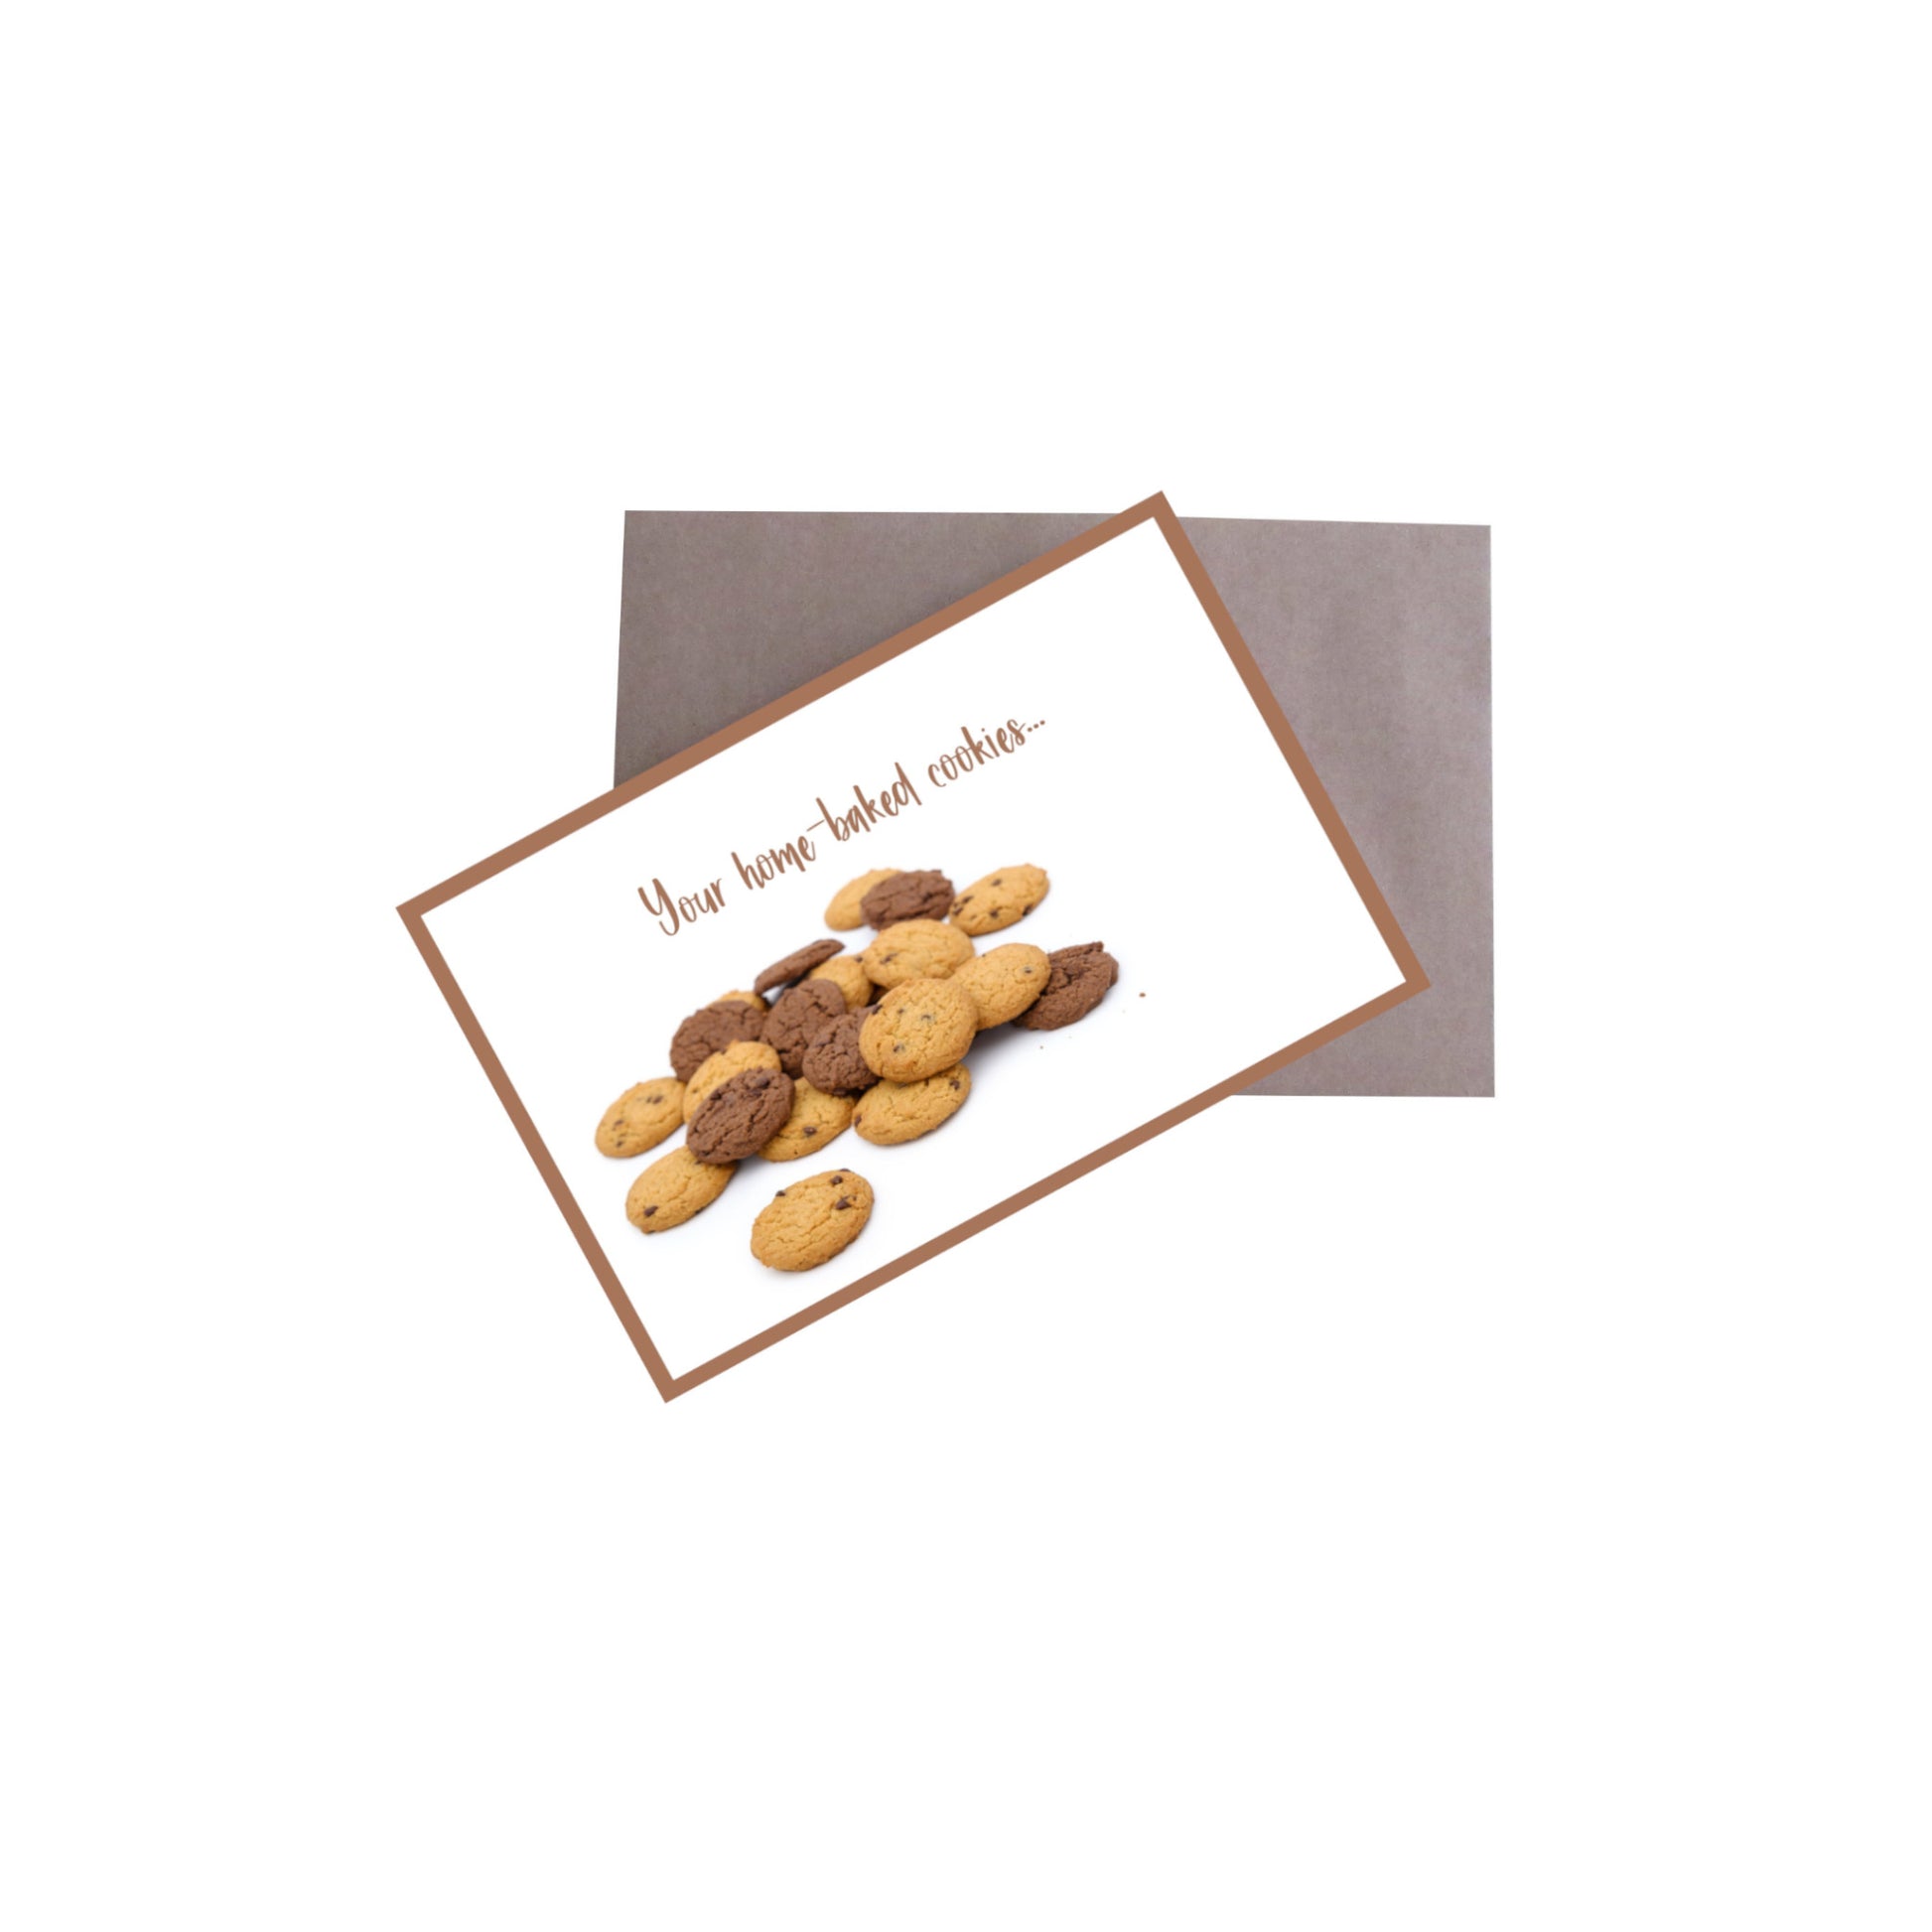 Your home-baked cookies 8.5x5.5 Landscape Greeting Card Front with Brown Envelope